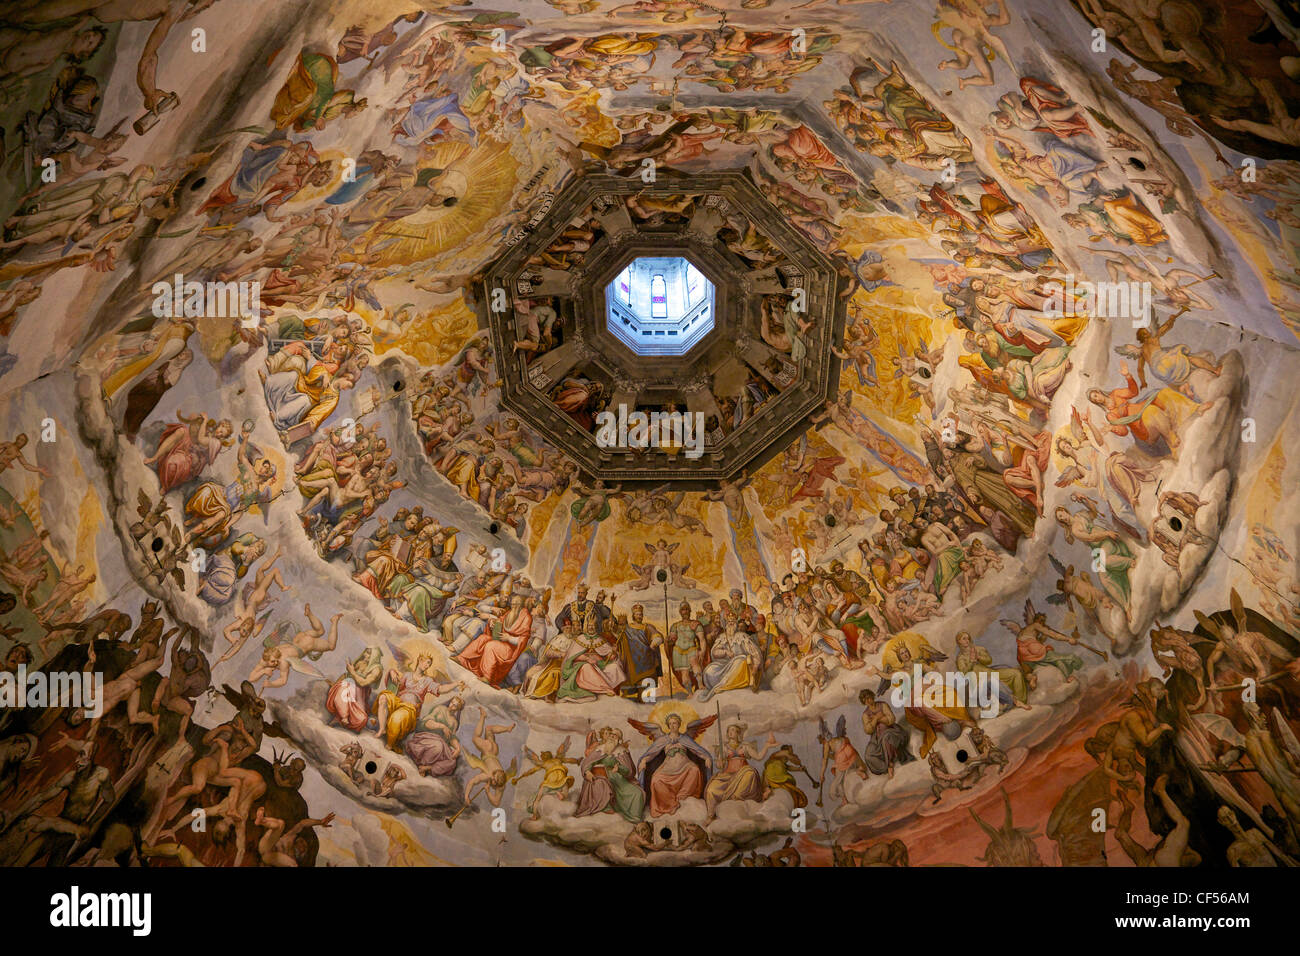 Last Judgement frescoes of the dome of Brunelleschi, by Vasari and Zuccari, Florence, Tuscany, Italy, Europe Stock Photo